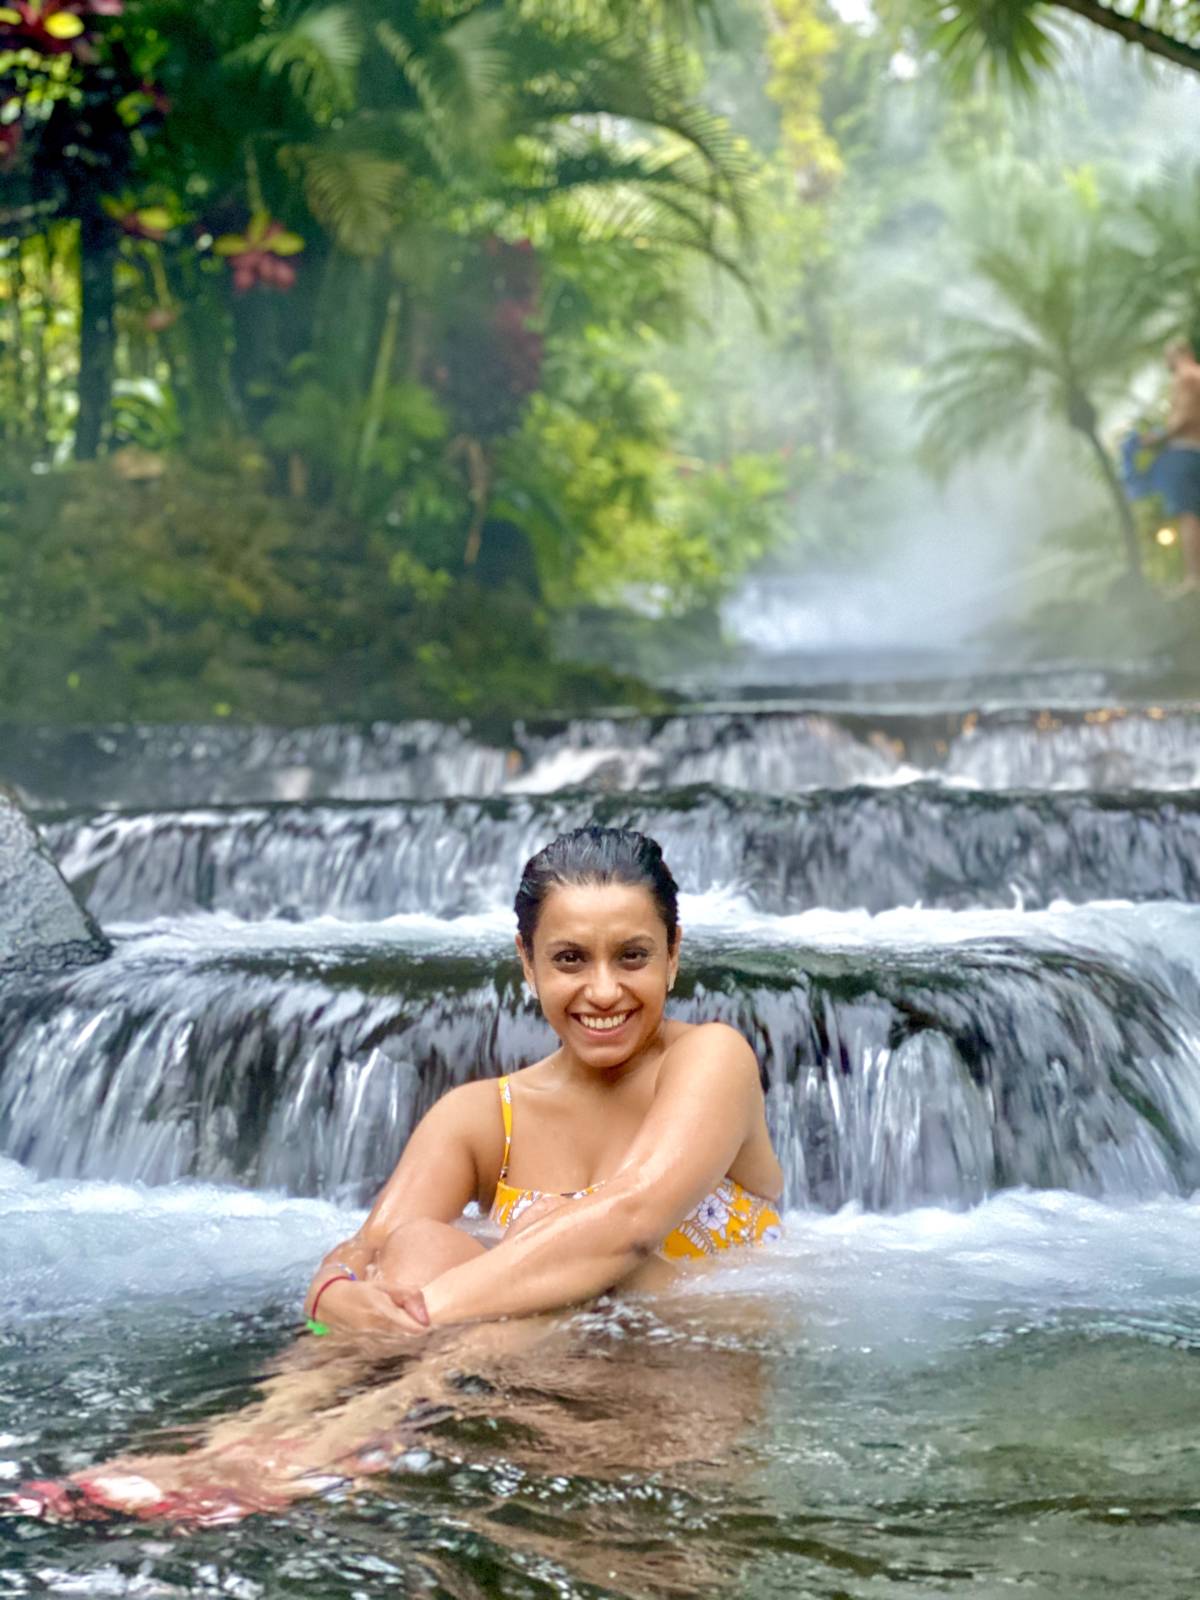 Bathing in the natural hot springs of Costa Rica